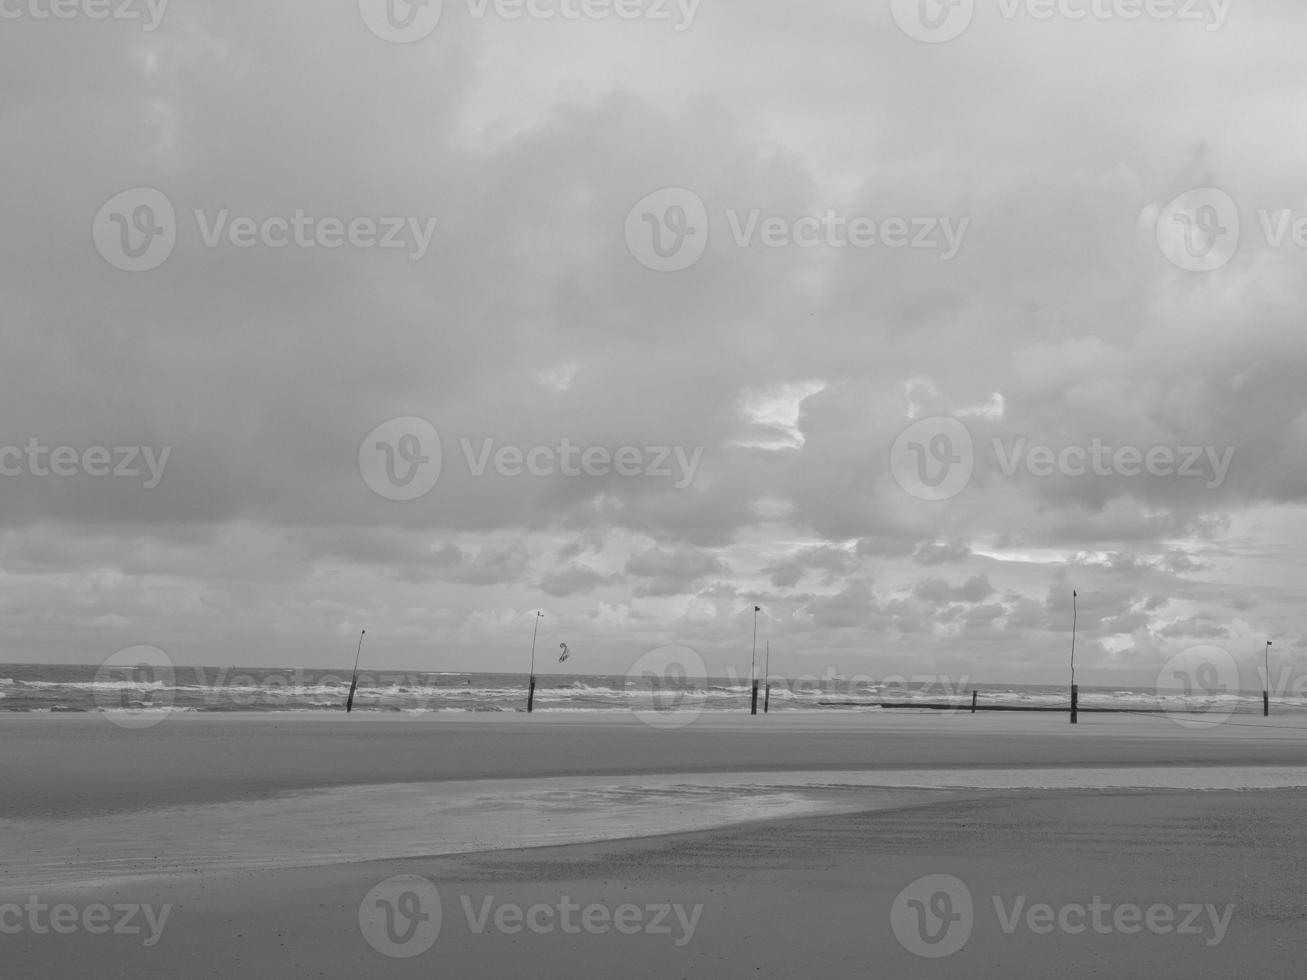 norderney island in the north sea photo